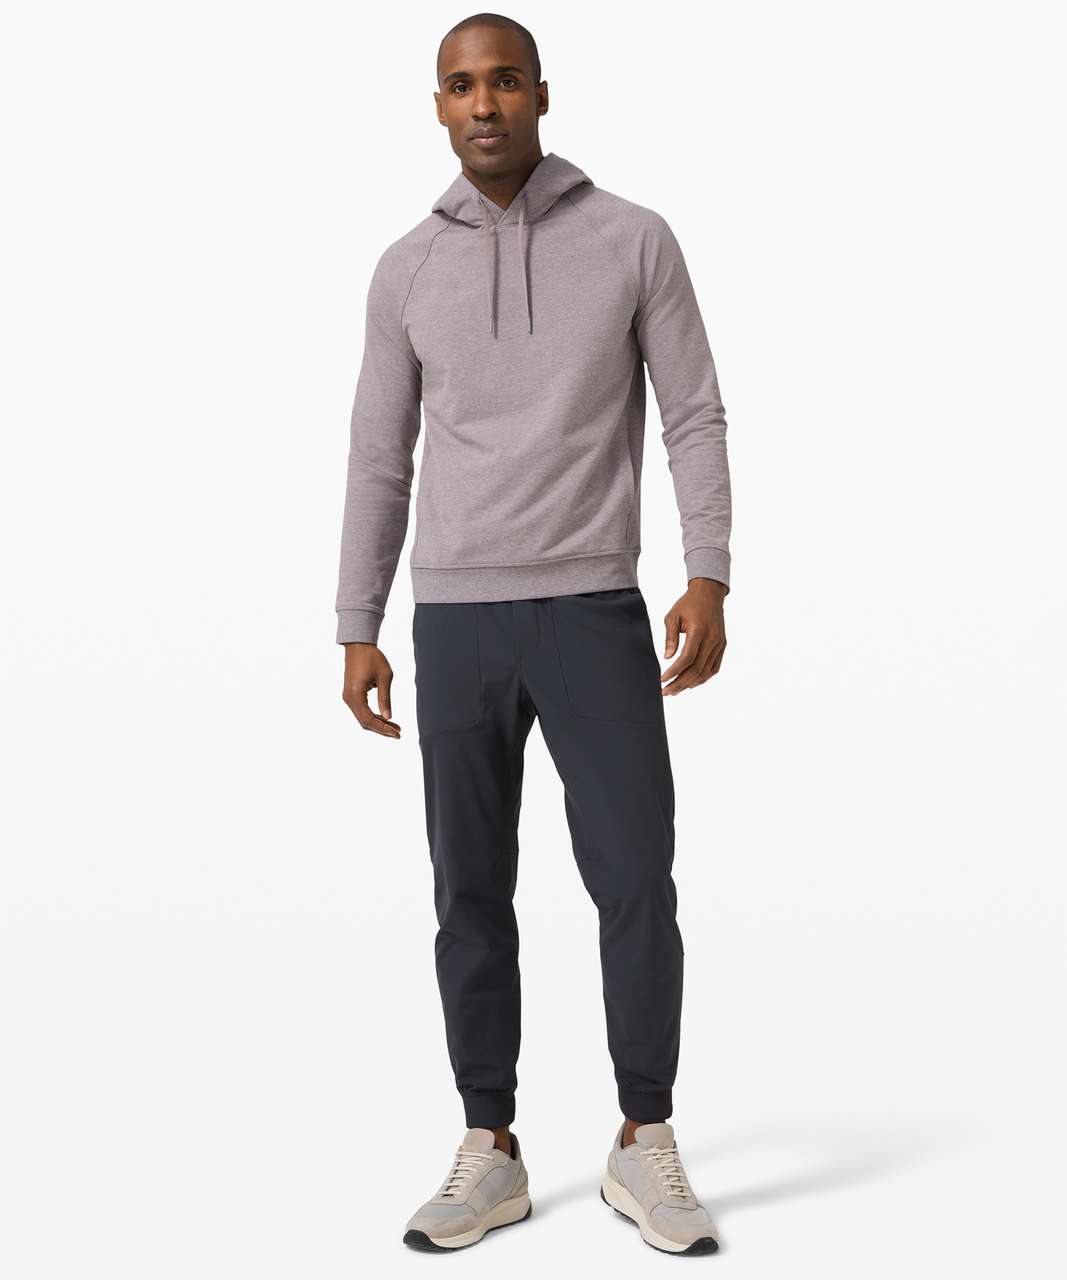 Lululemon City Sweat Pullover Hoodie French Terry - Heathered Lunar Rock